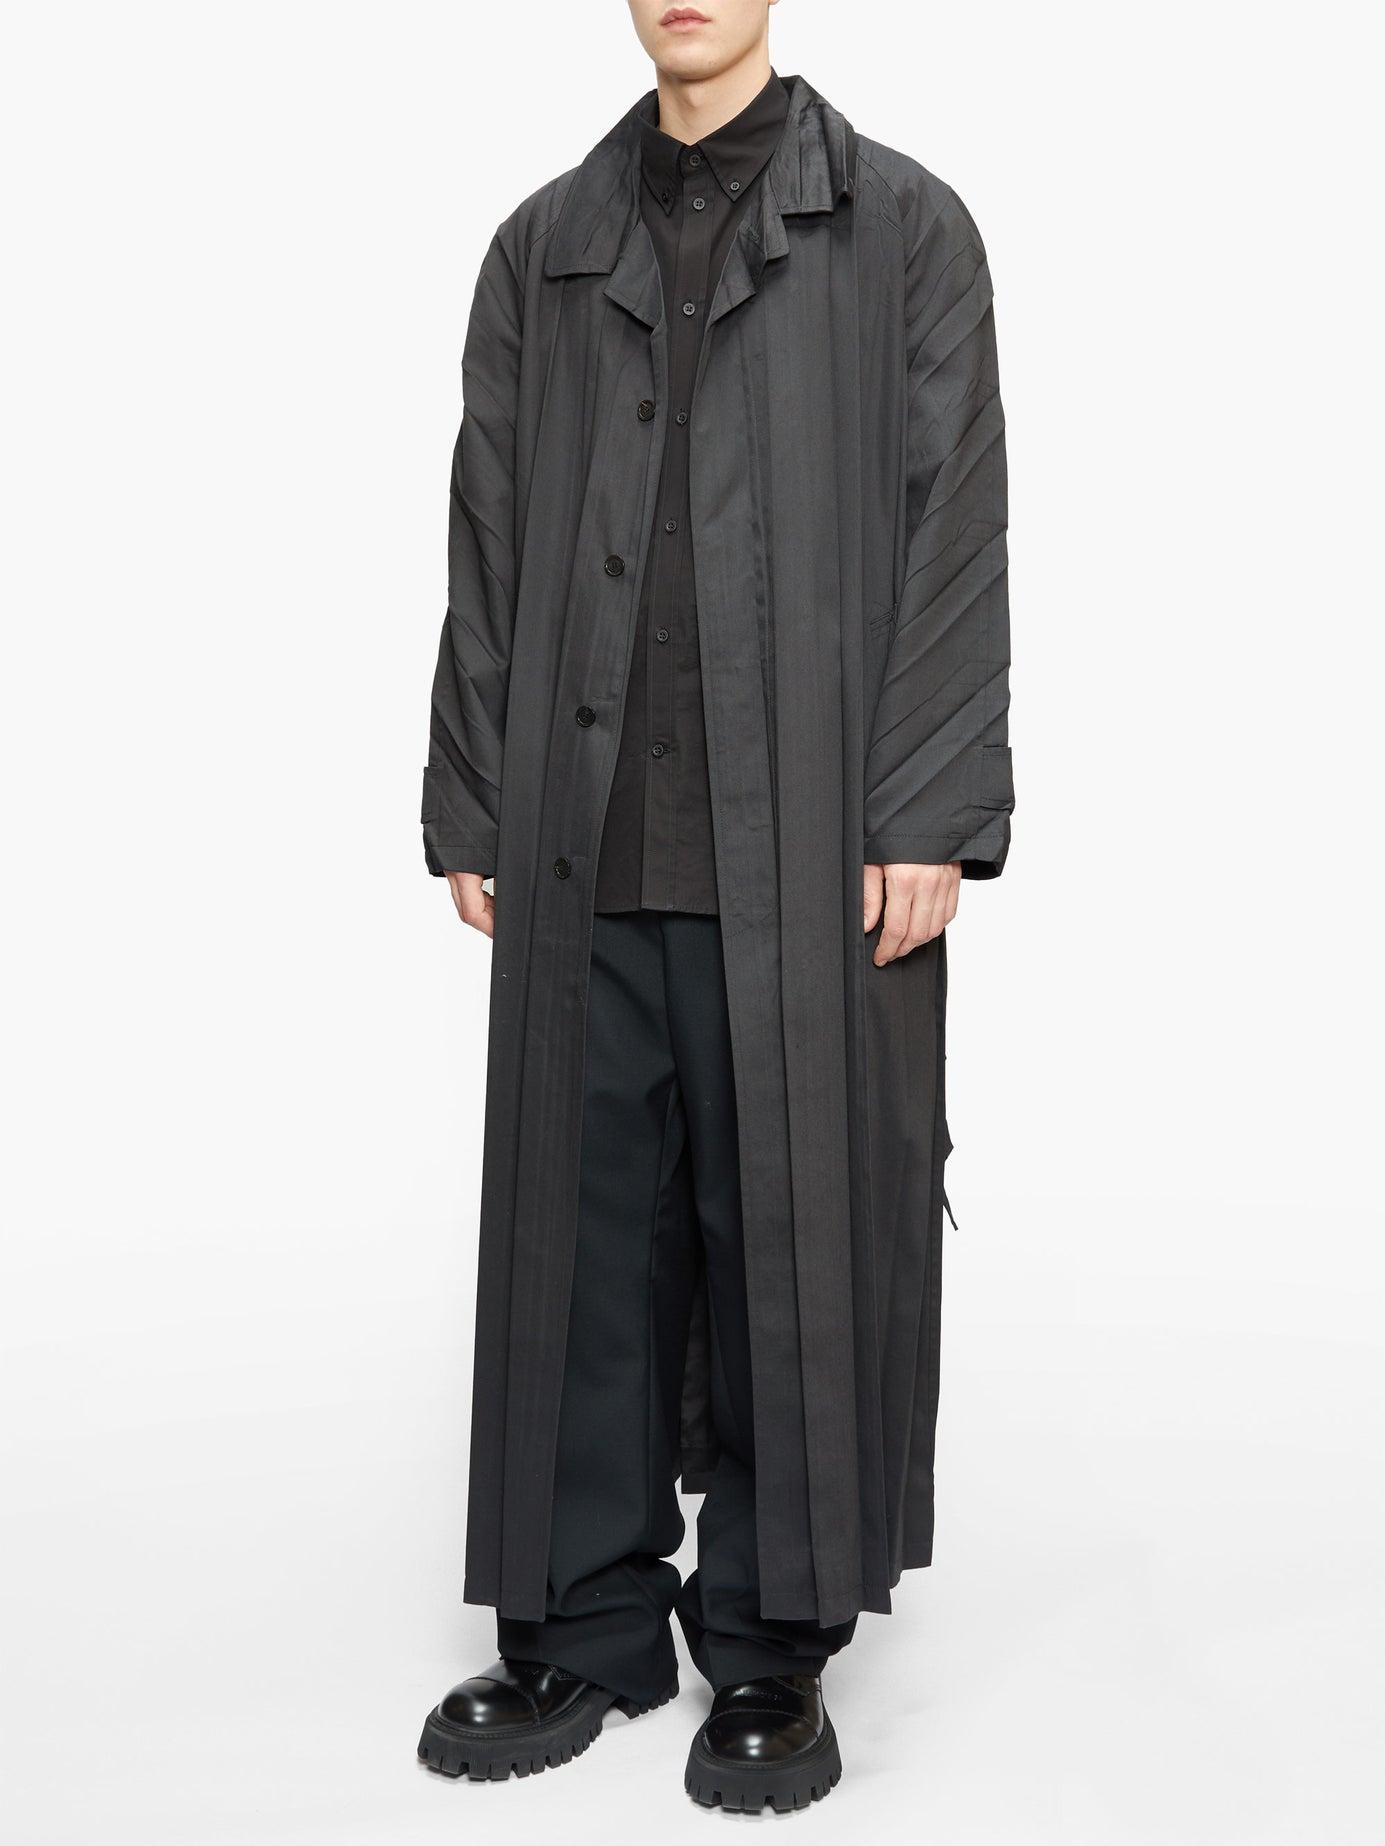 Balenciaga Pleated Twill Trench Coat in Black for Men | Lyst